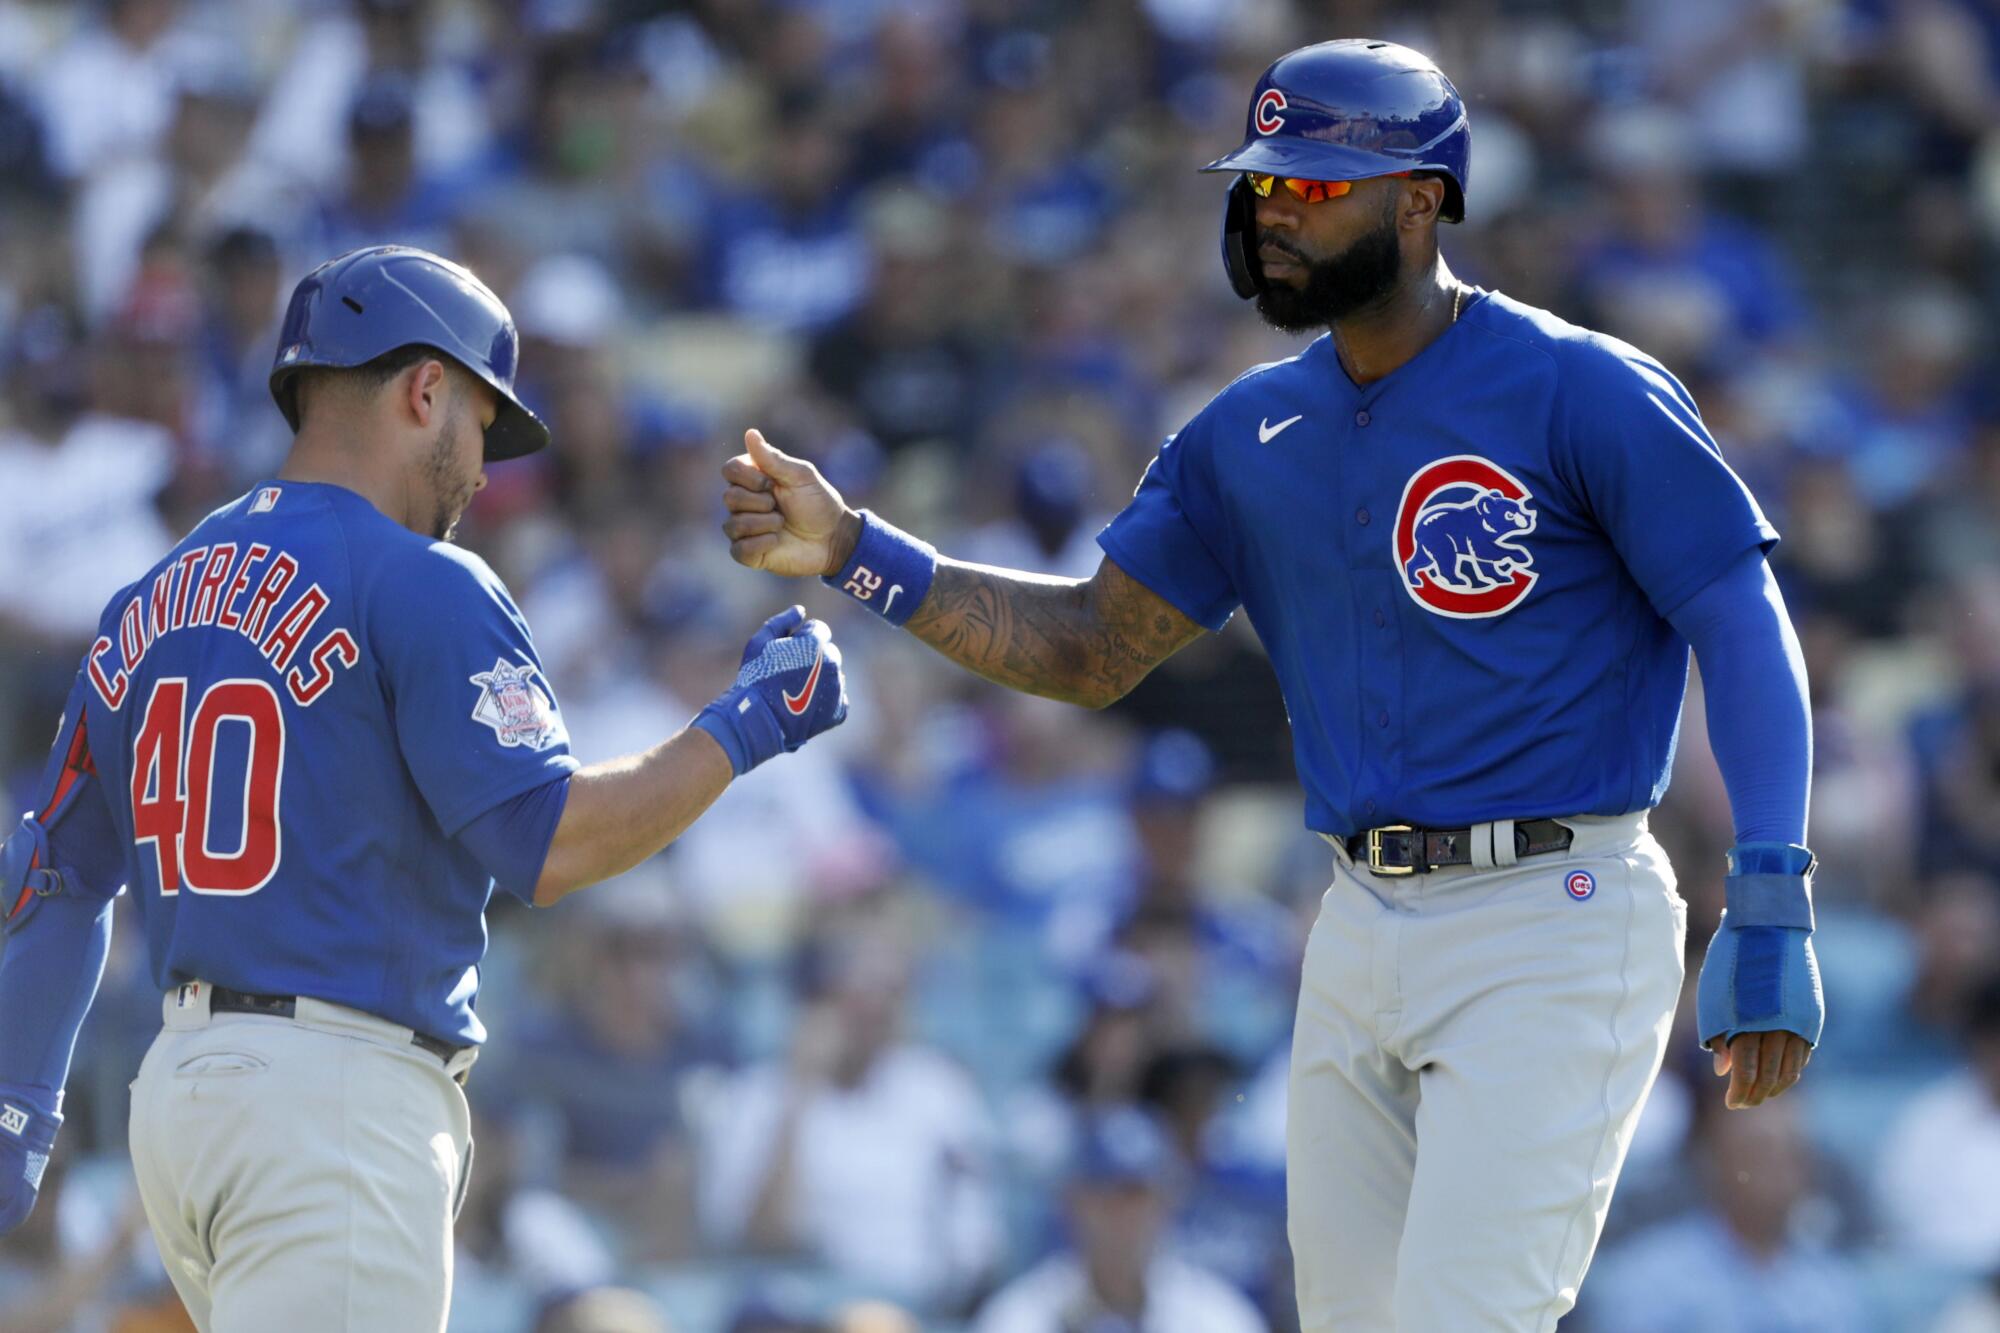 Jason Heyward, right, was released by the Chicago Cubs in November. He signed a minor league deal with the Dodgers last week.